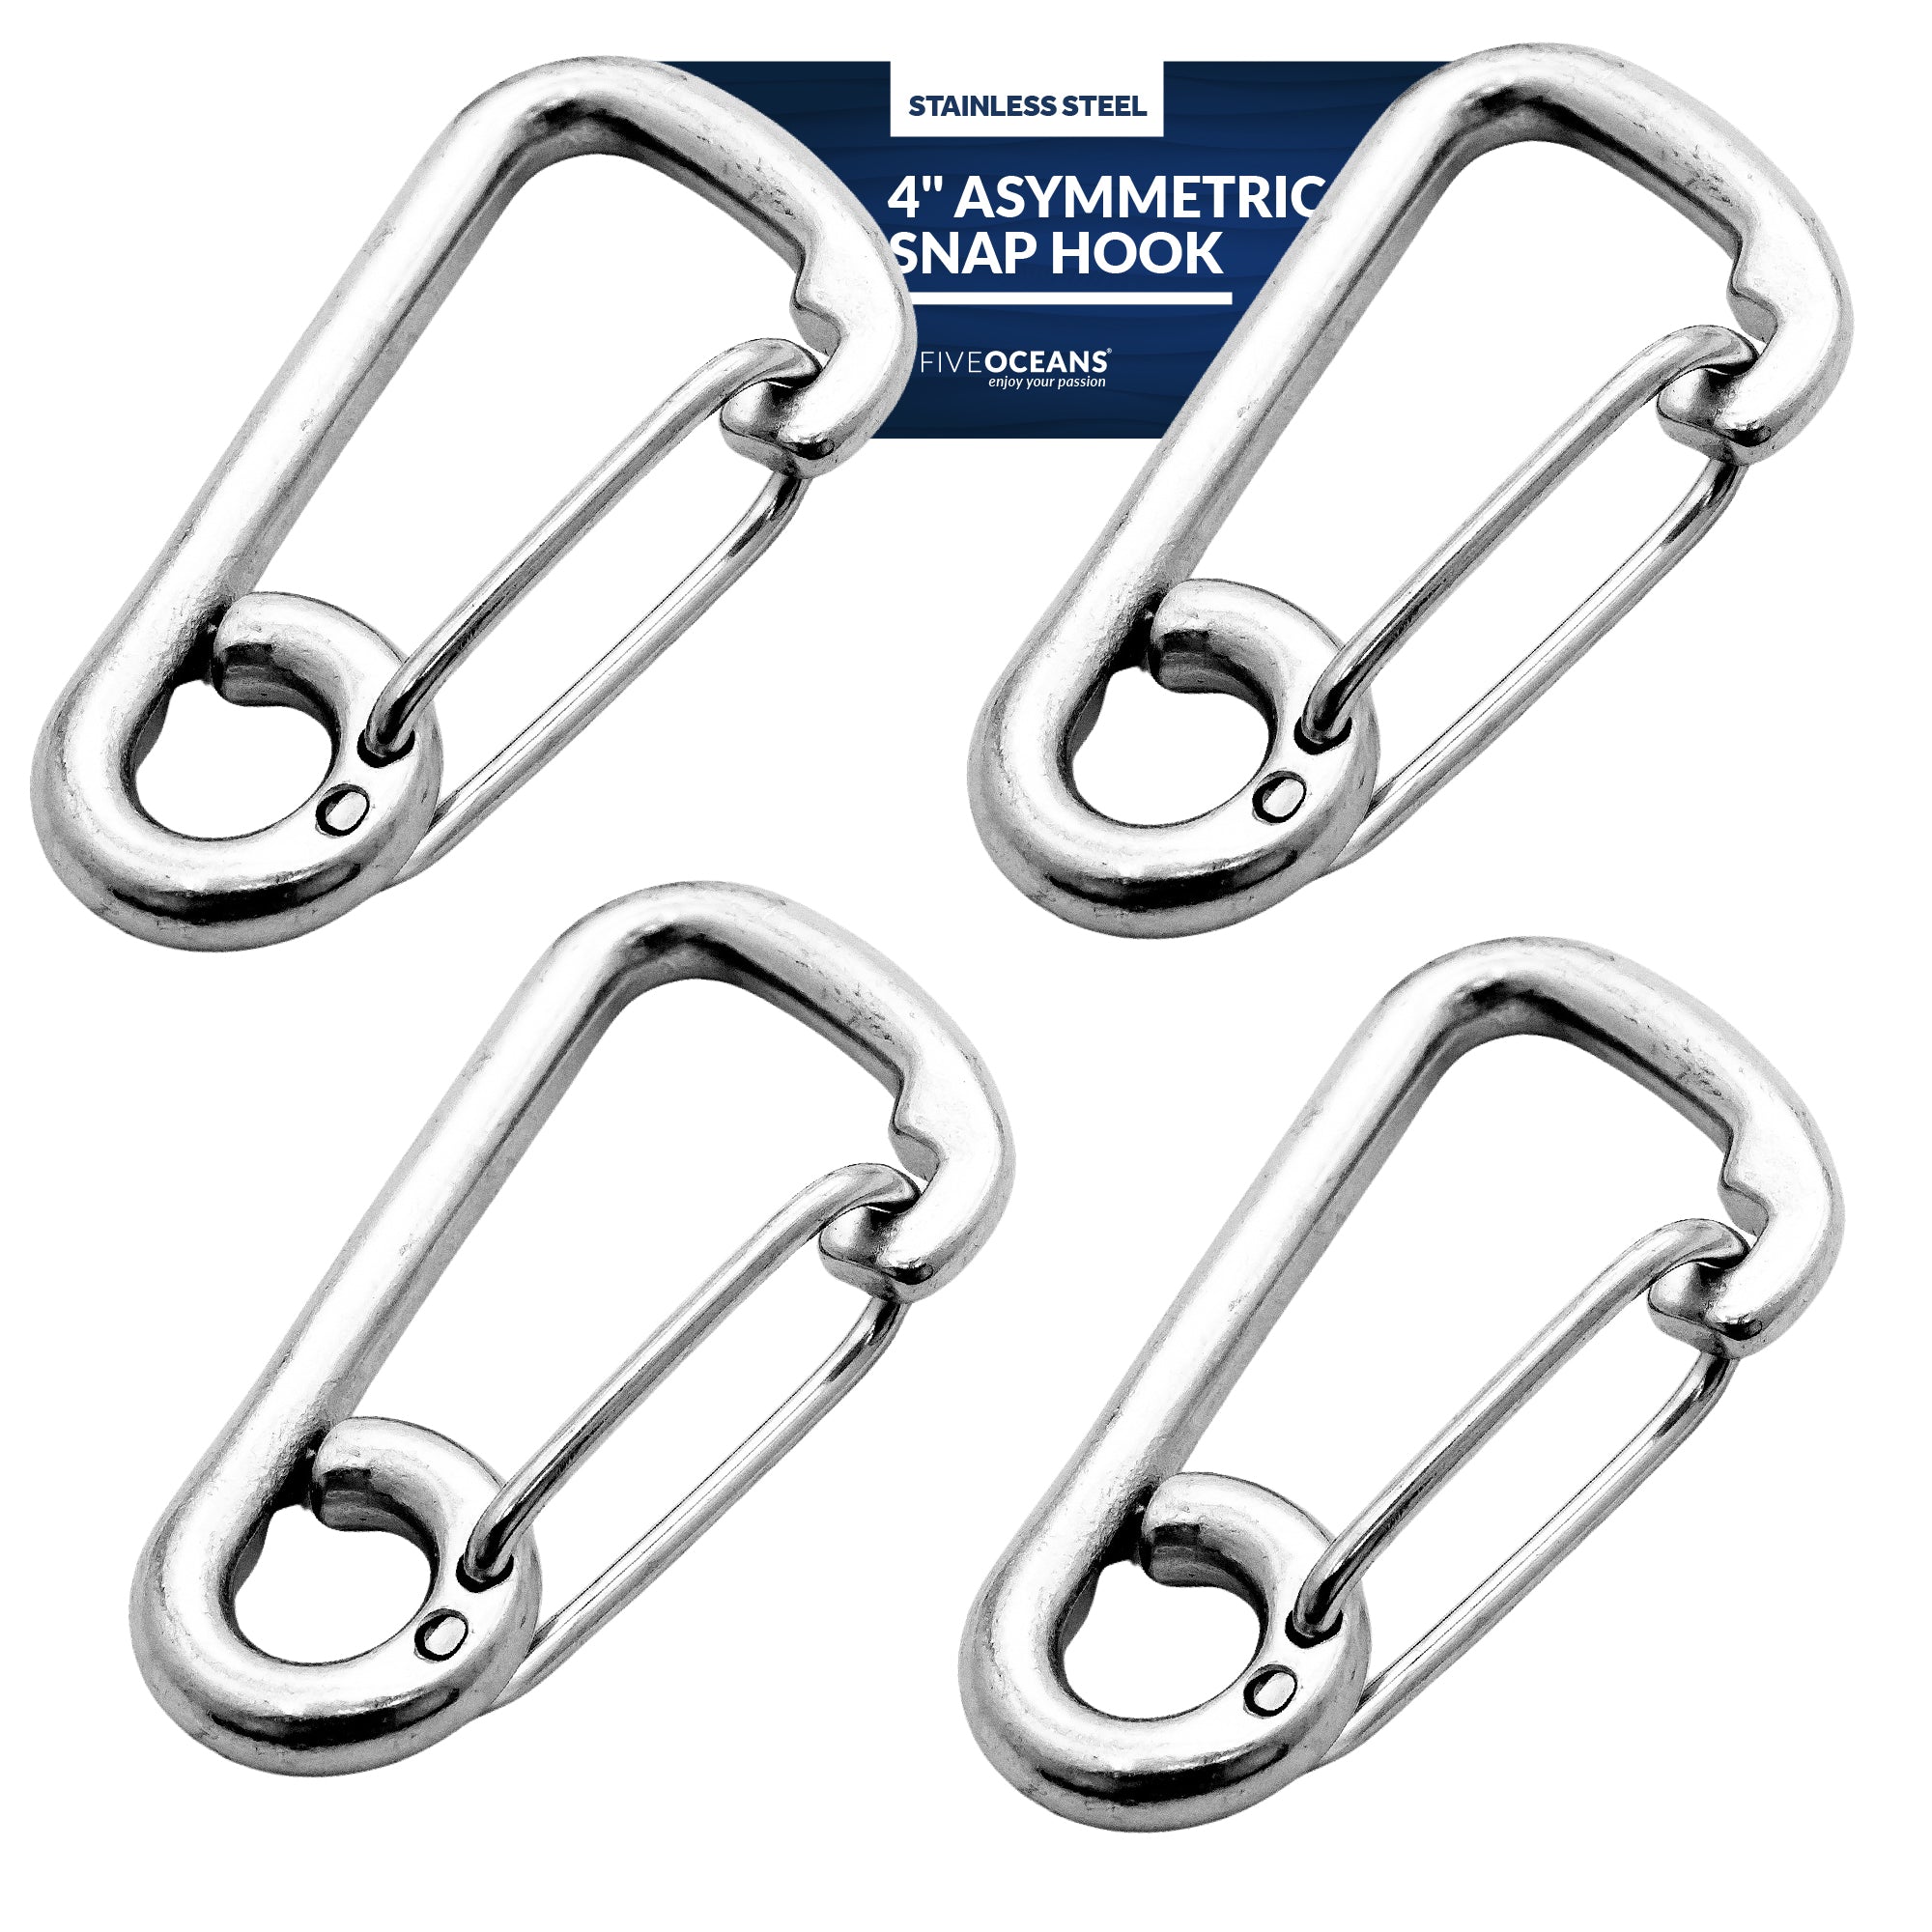 Five Oceans Stainless Asymmetric Snap Hook 4 inch (Set of 4) Fo-466-m4